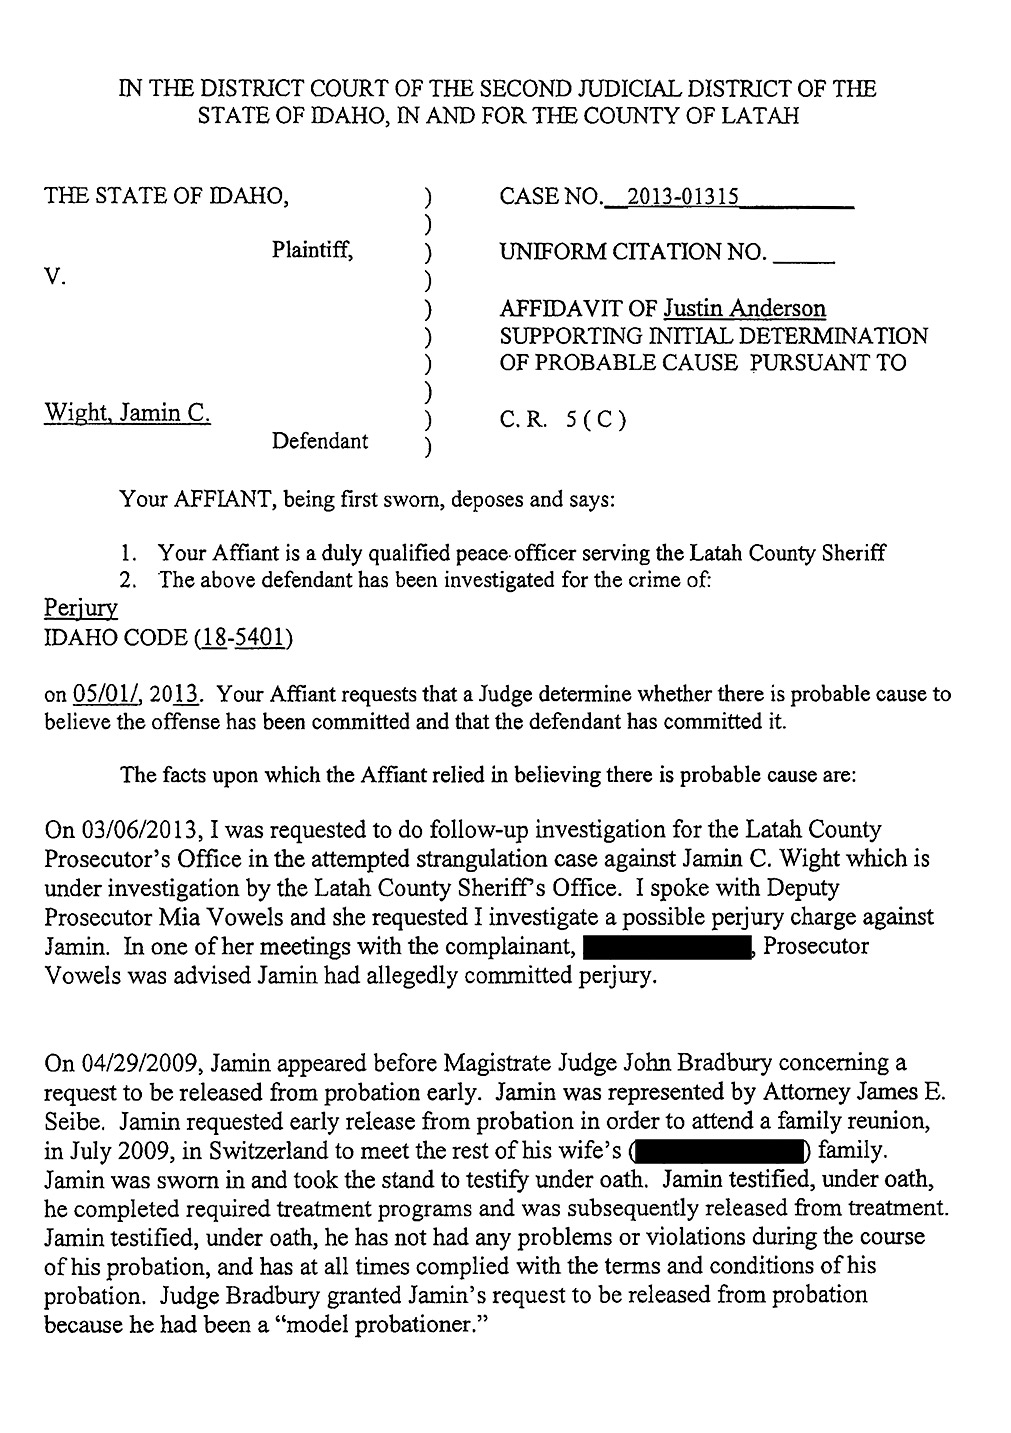 Affidavit of Latah County Sheriff’s Detective Justin Anderson page 1